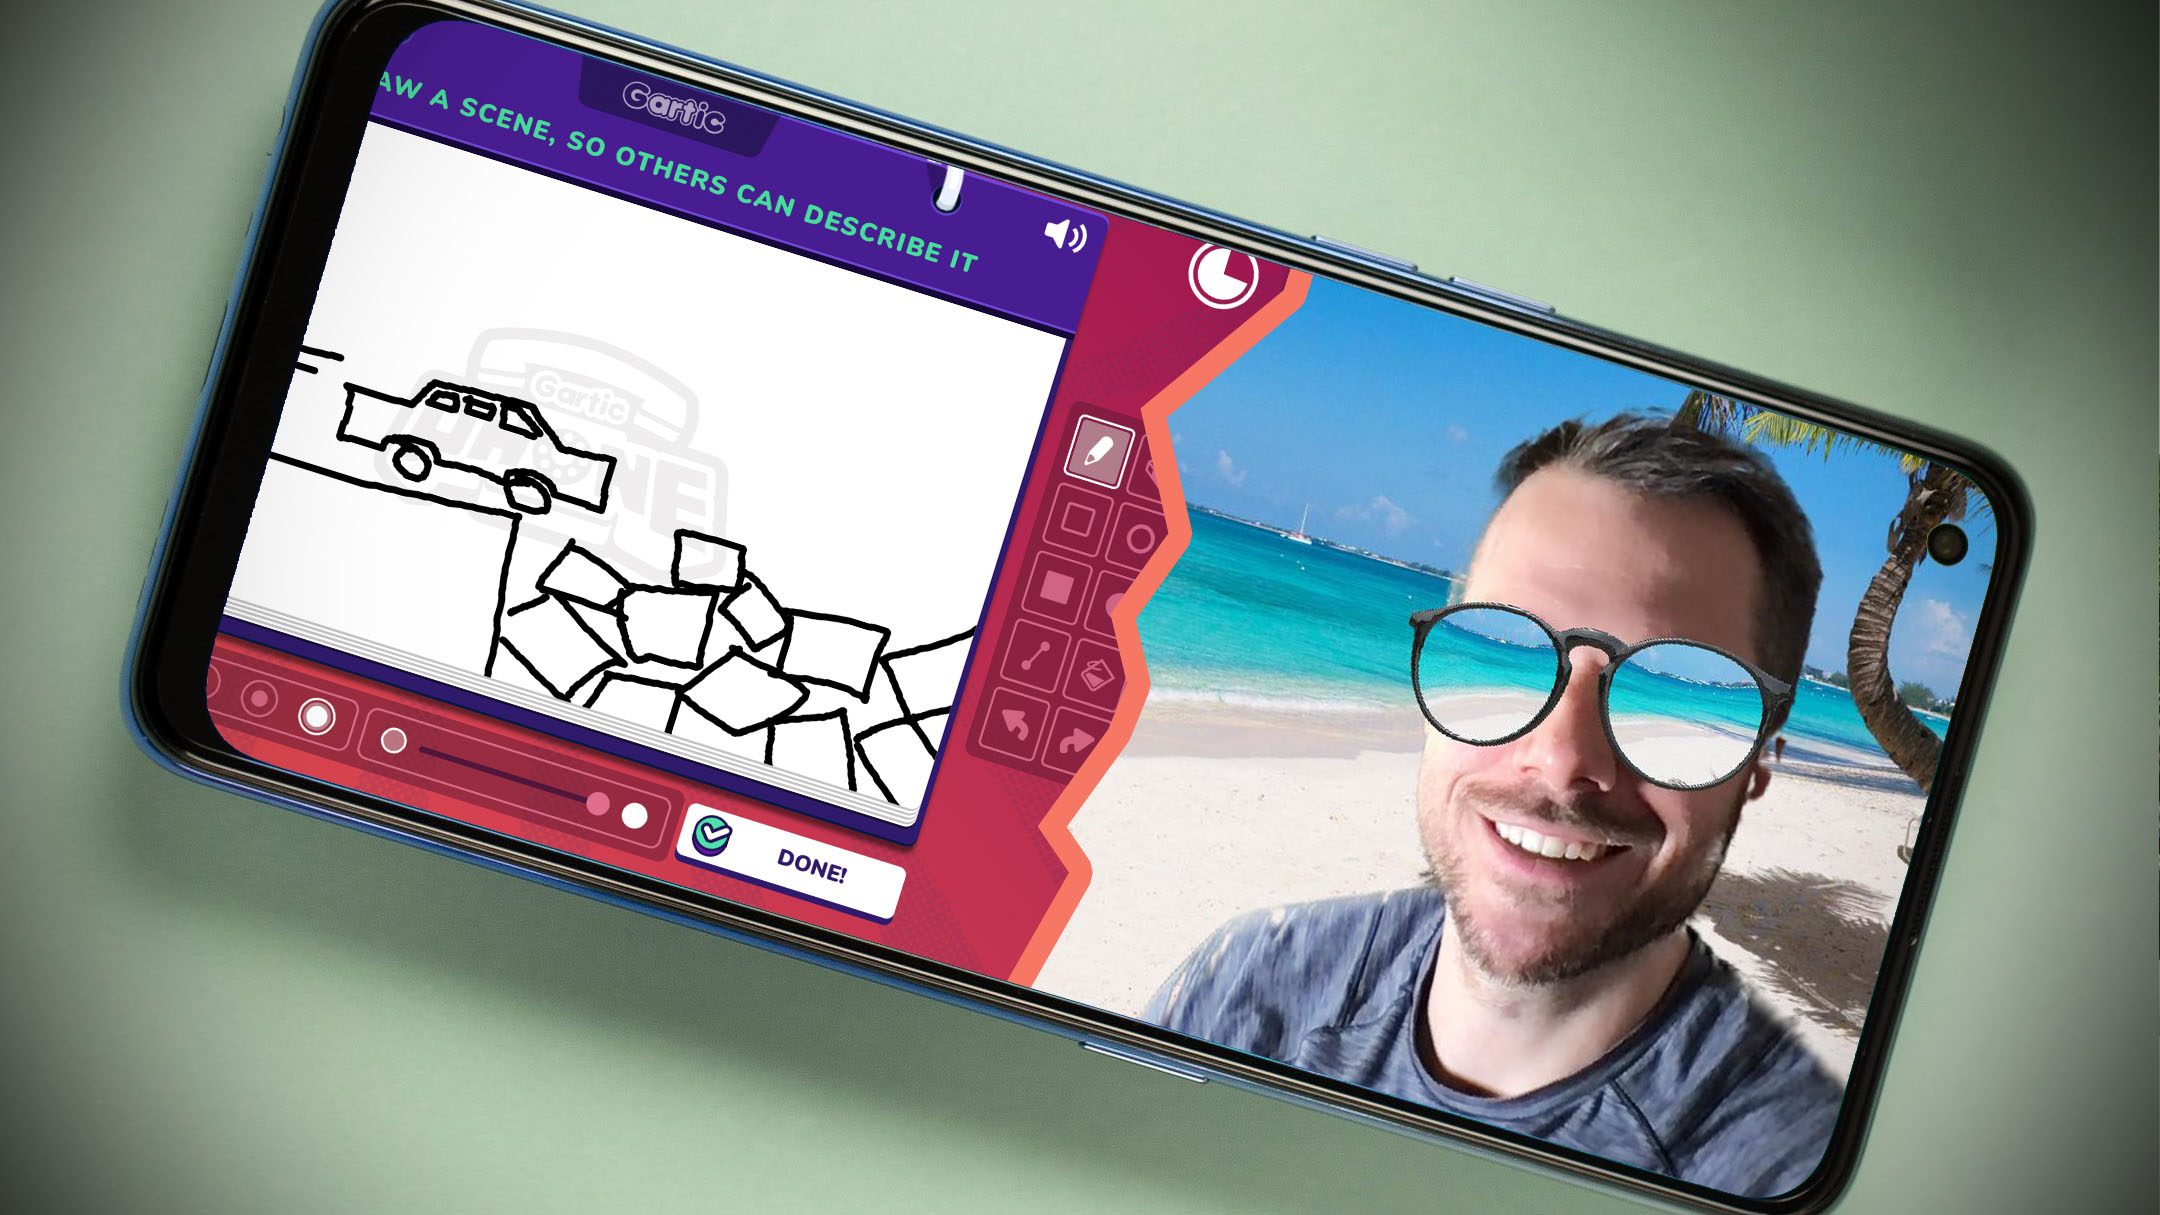 About: Gartic-Phone Draw & Guess Tips (Google Play version